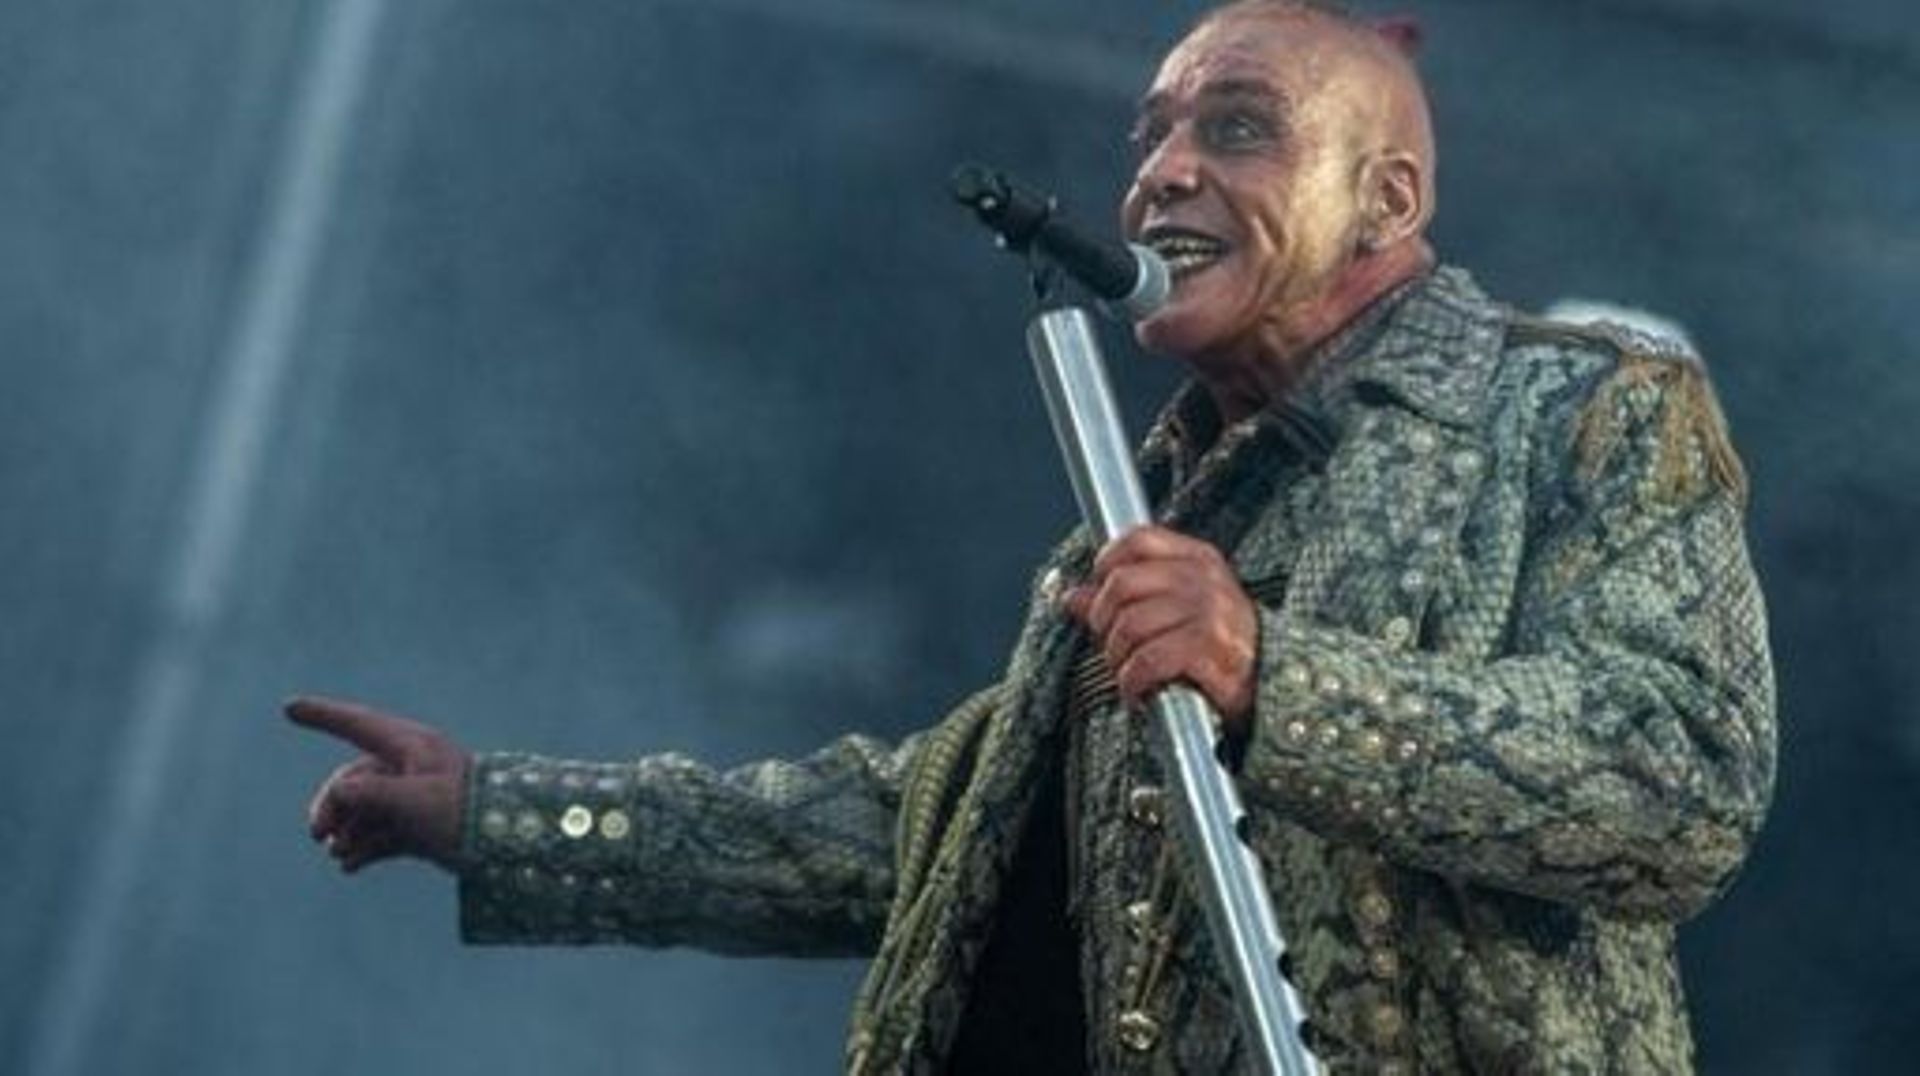 Till Lindemann, lead vocalist of the band Rammstein, performs on stage of the HDI-Arena stadium in Hanover, northern Germany, during a concert of the band’s Europa Stadion Tour on July 2, 2019. Christophe Gateau / DPA / AFP Germany OUT / RESTRICTED TO ED